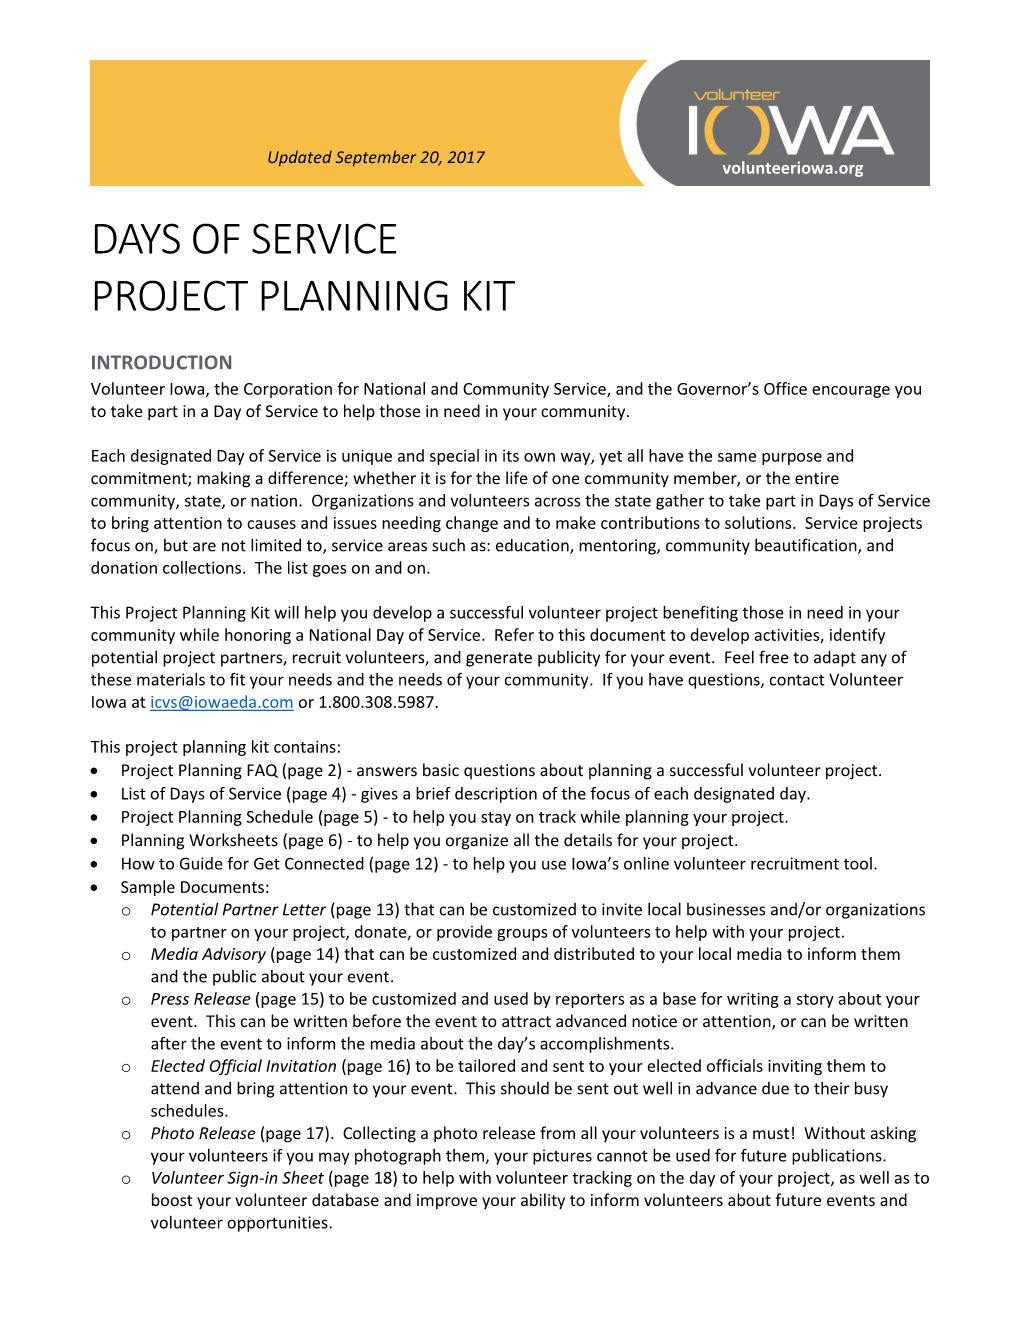 Days of Service Project Planning Kit